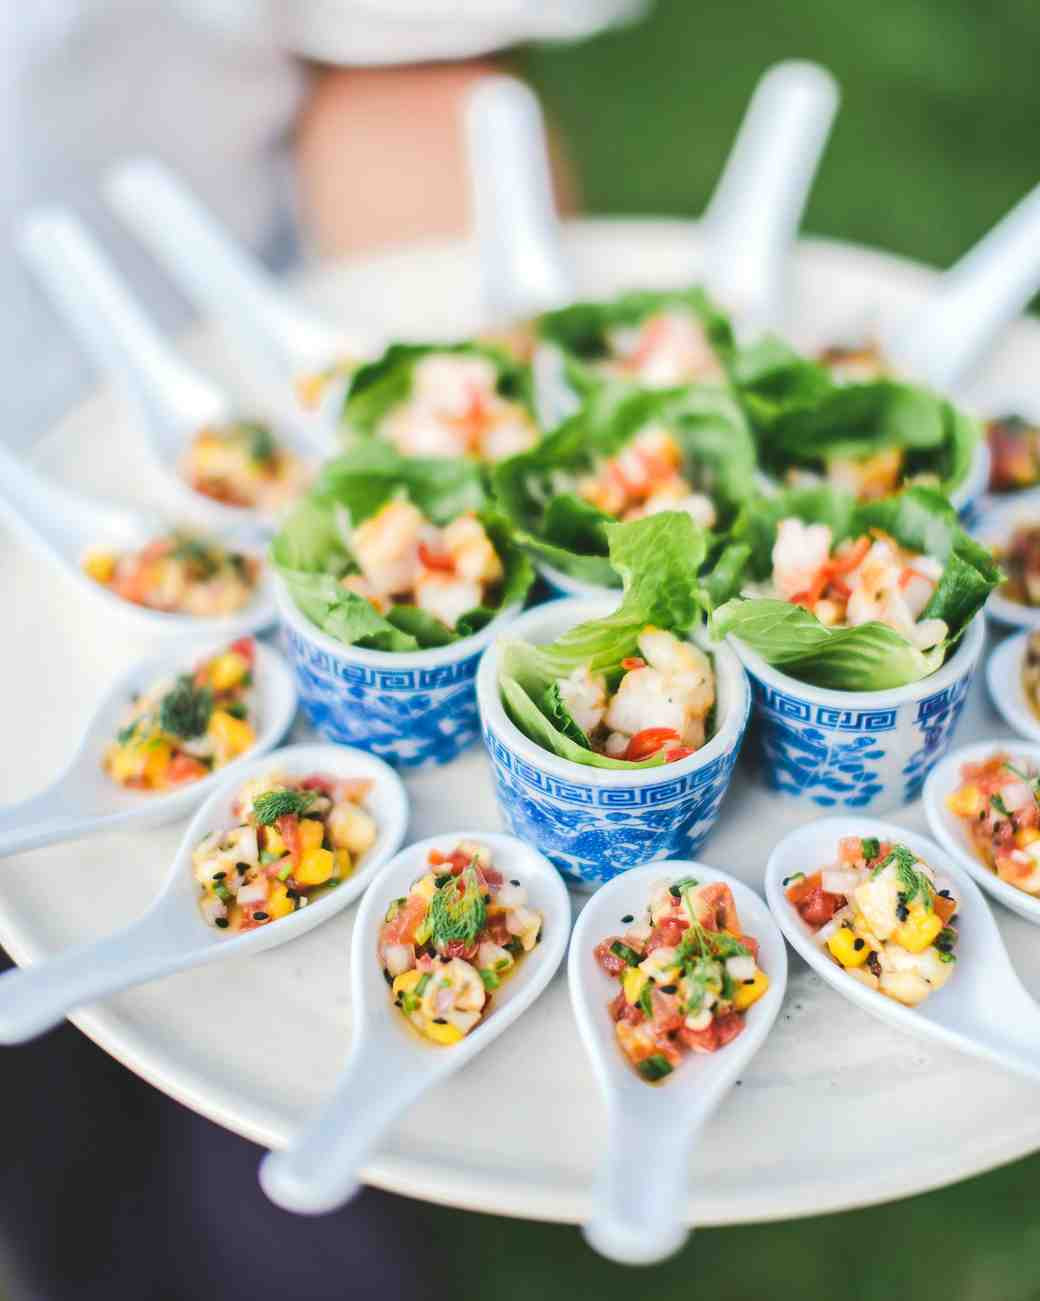 Food Ideas For Engagement Party In December
 25 Unexpected Wedding Food Ideas Your Guests Will Love